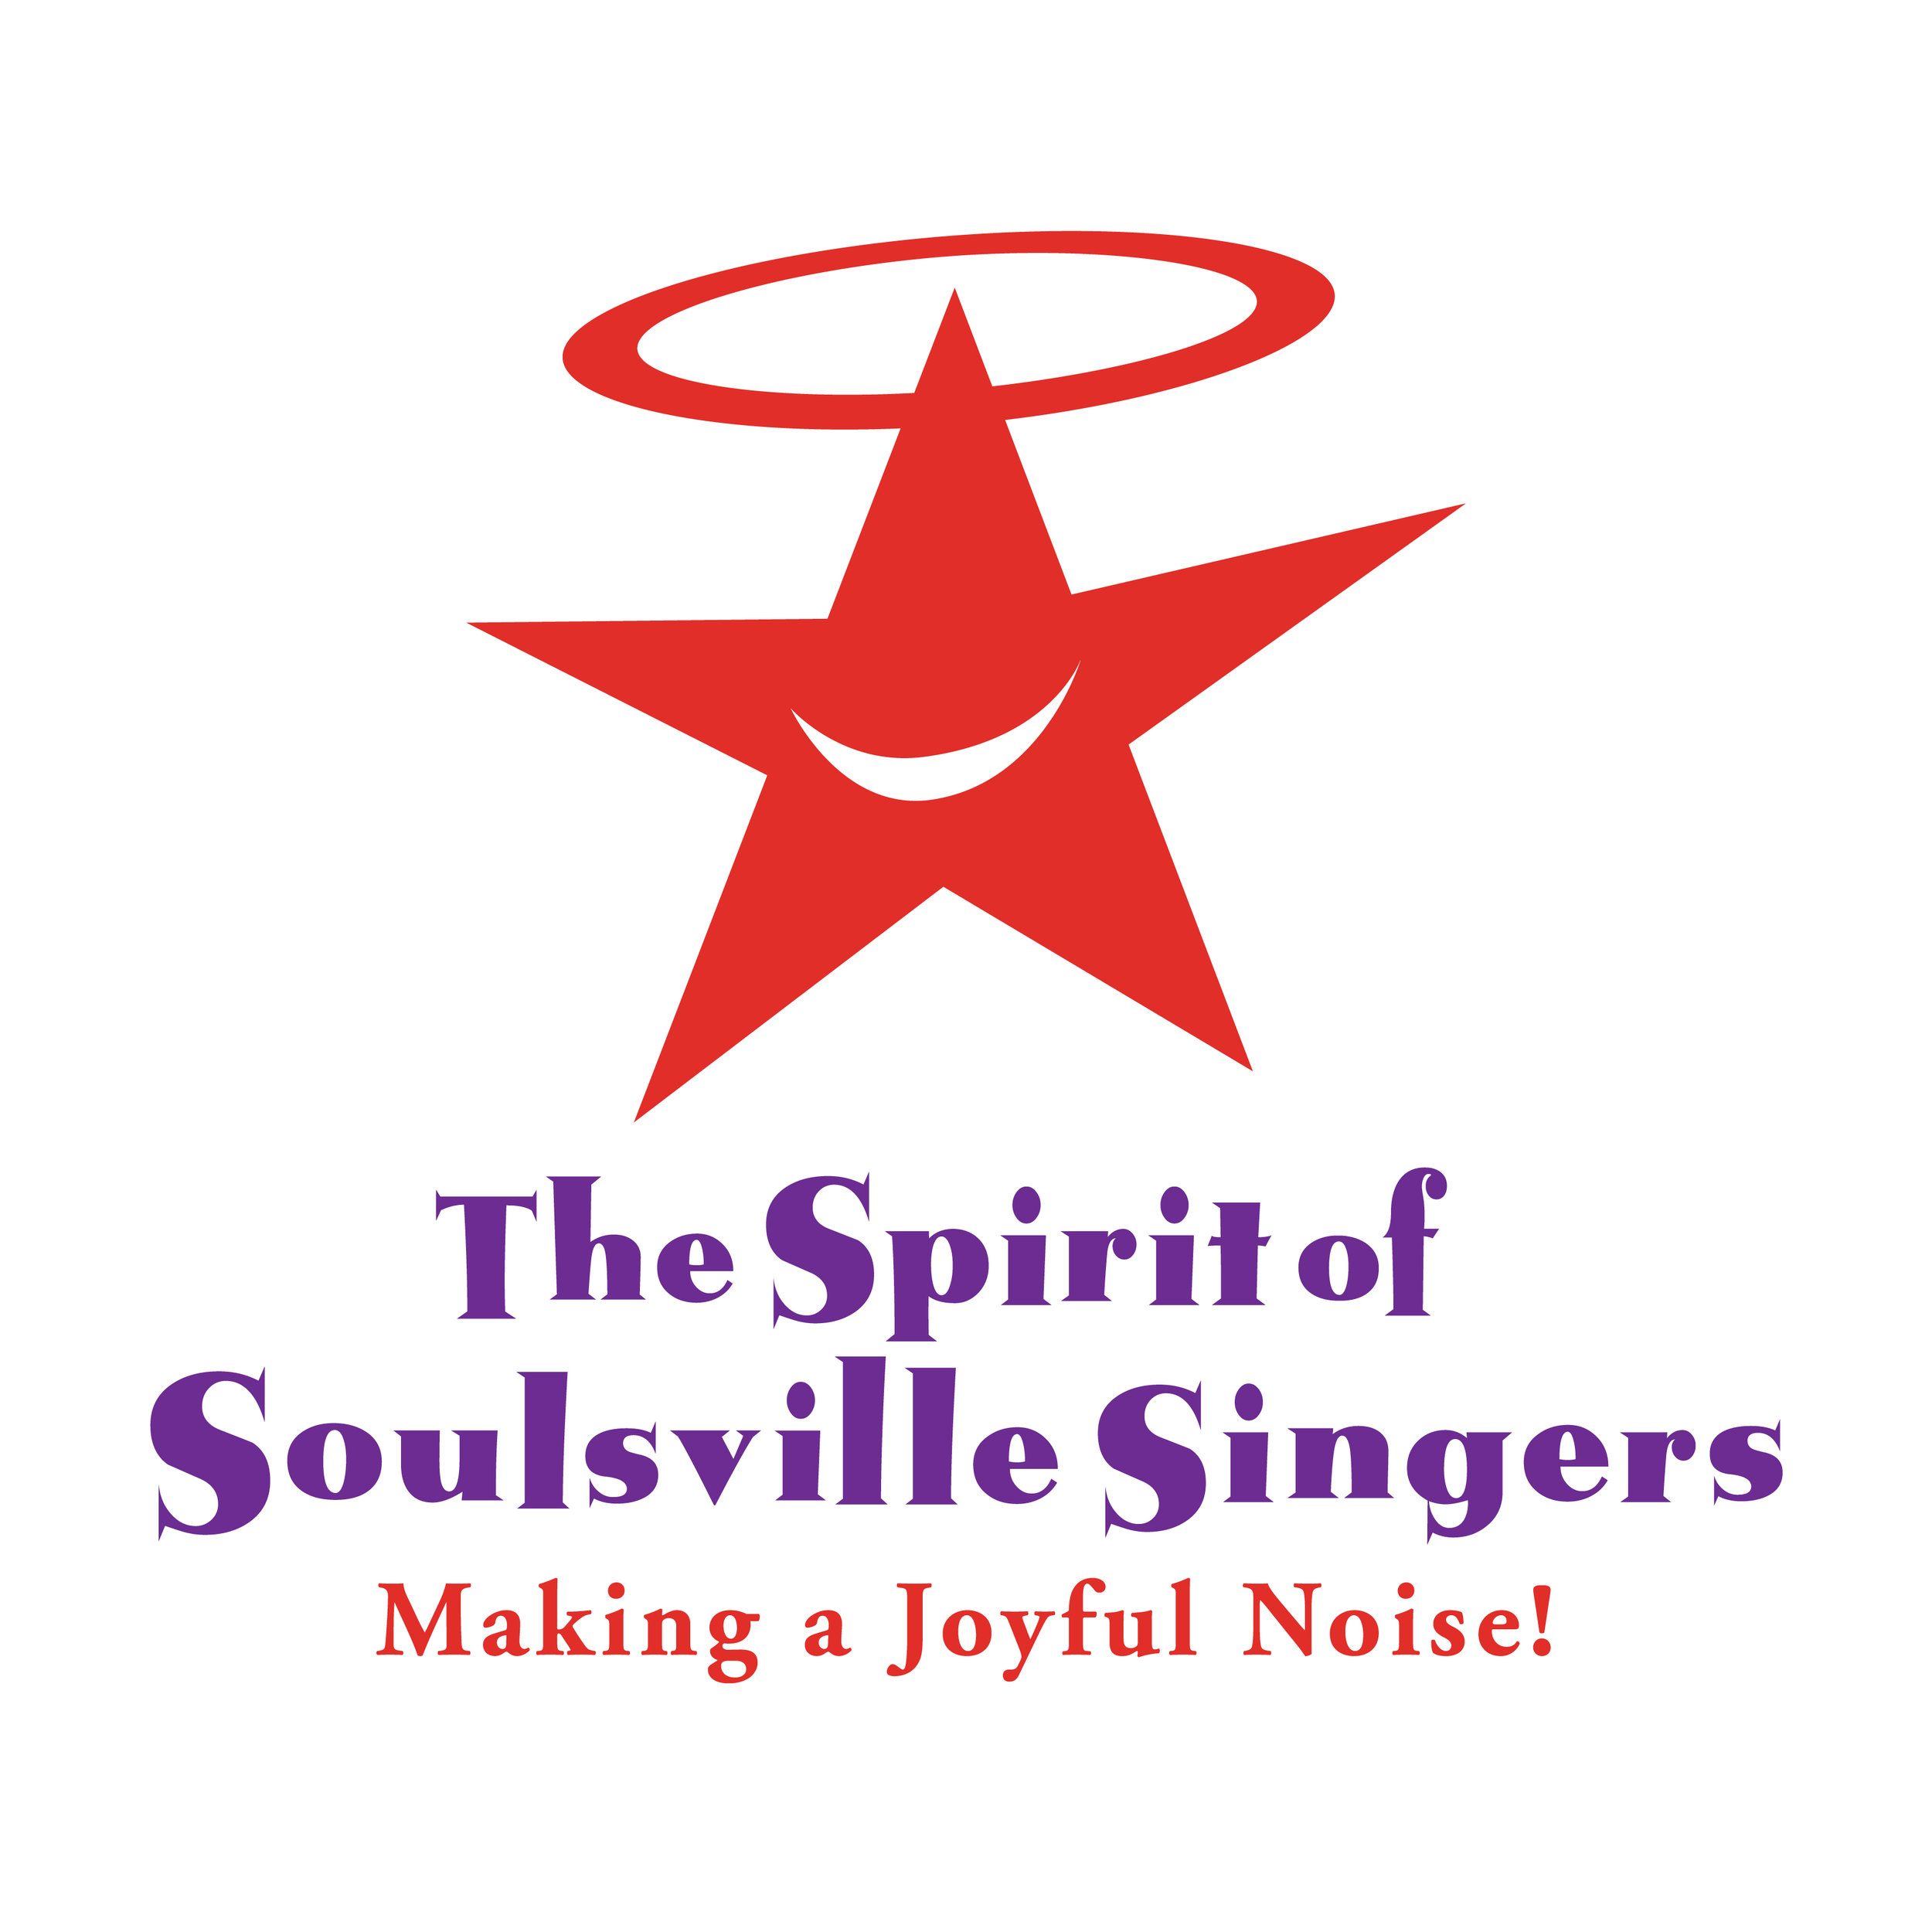  The Spirit of Soulsville Singers logo  Creative, design and copy line by Chuck Mitchell 